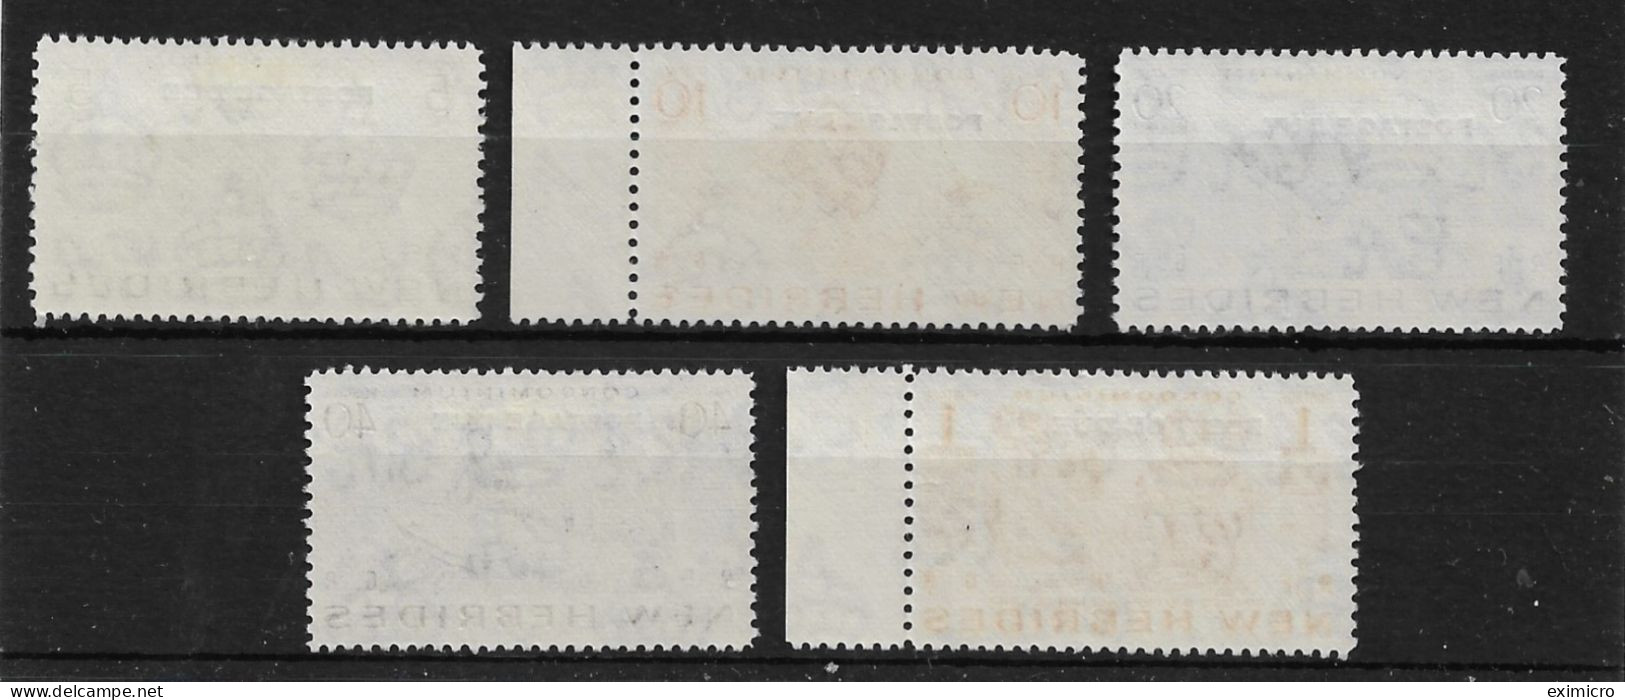 NEW HEBRIDES 1953 POSTAGE DUE SET SG D11/D15 UNMOUNTED MINT/VERY LIGHTLY MOUNTED MINT Cat £30 - Used Stamps